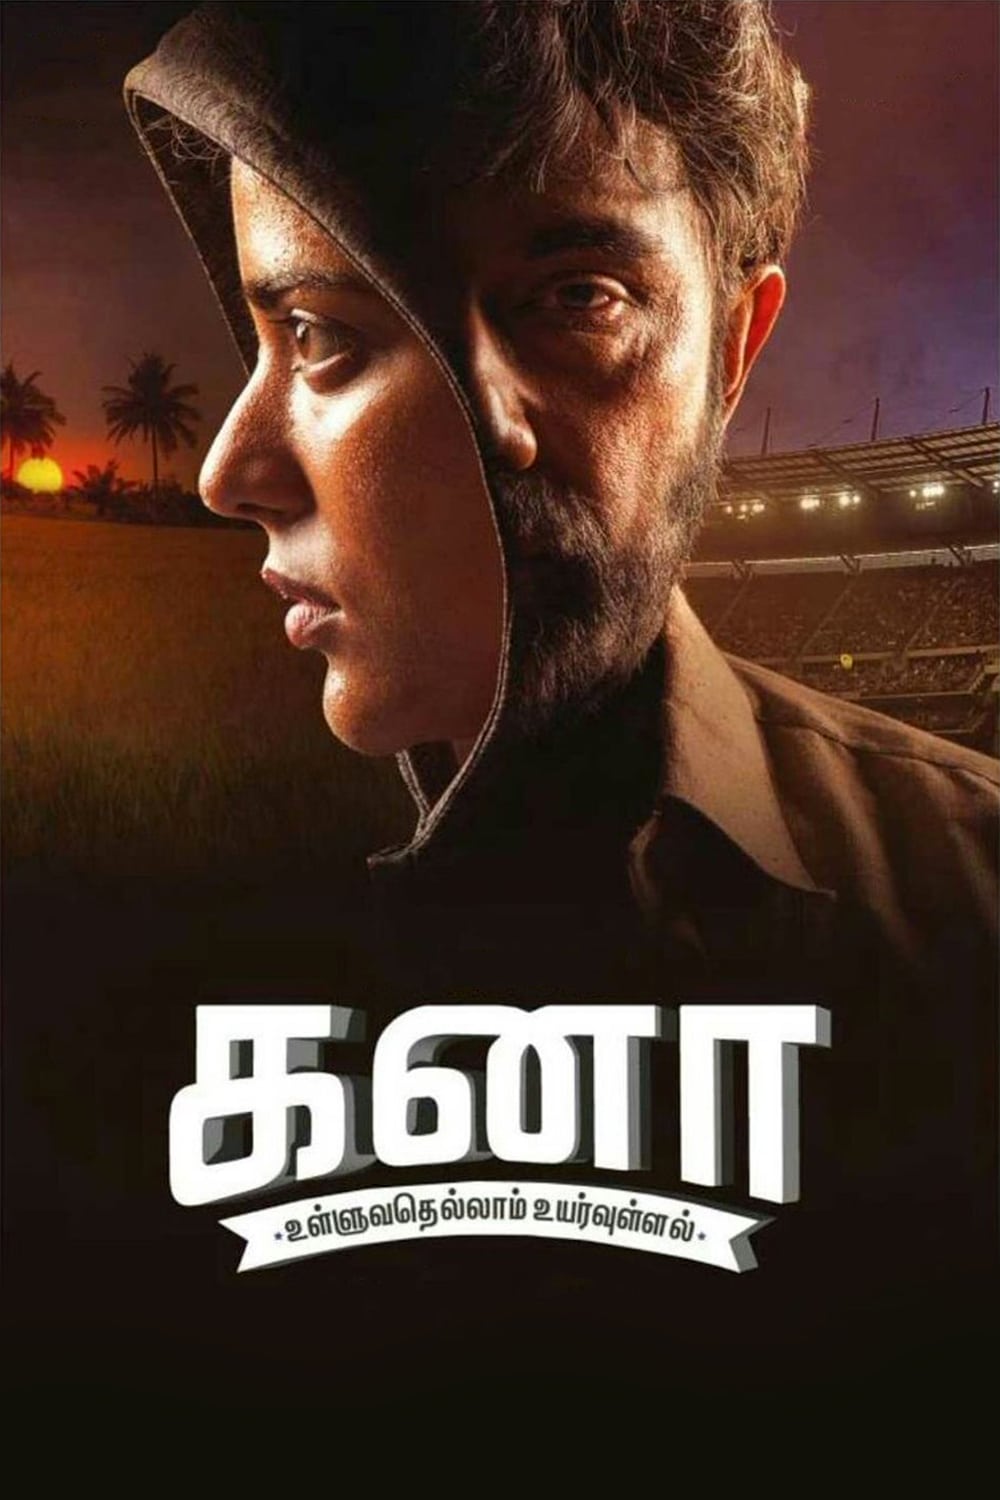 Poster for the movie "Kanaa"